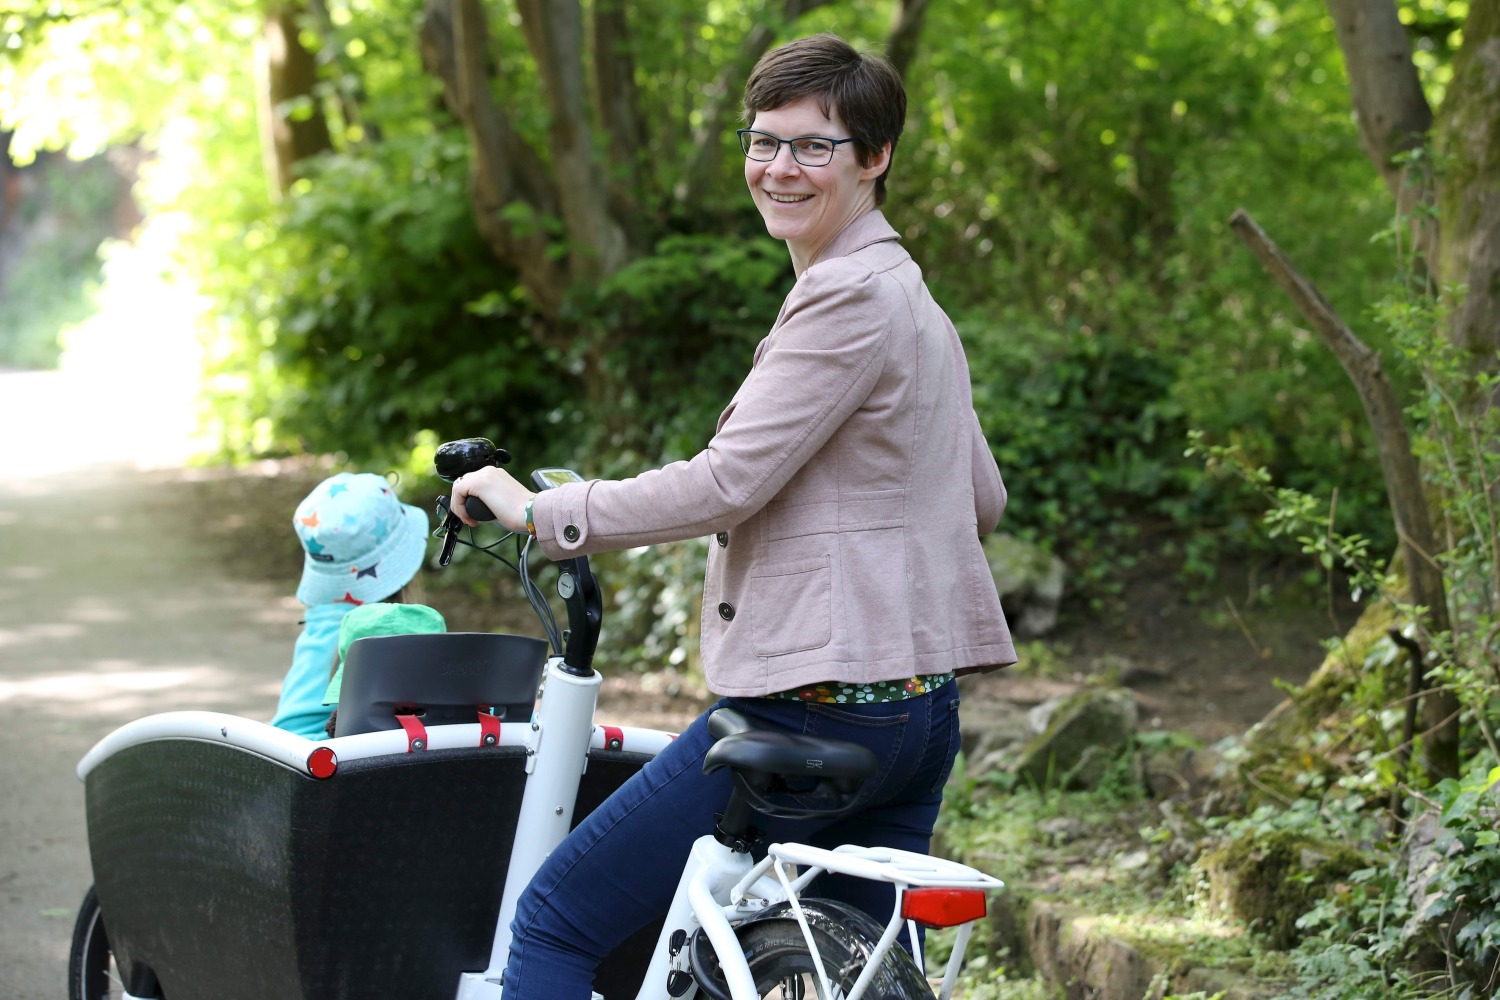 Saskia Heijltjes on a cargo bike with two children in the box at the front